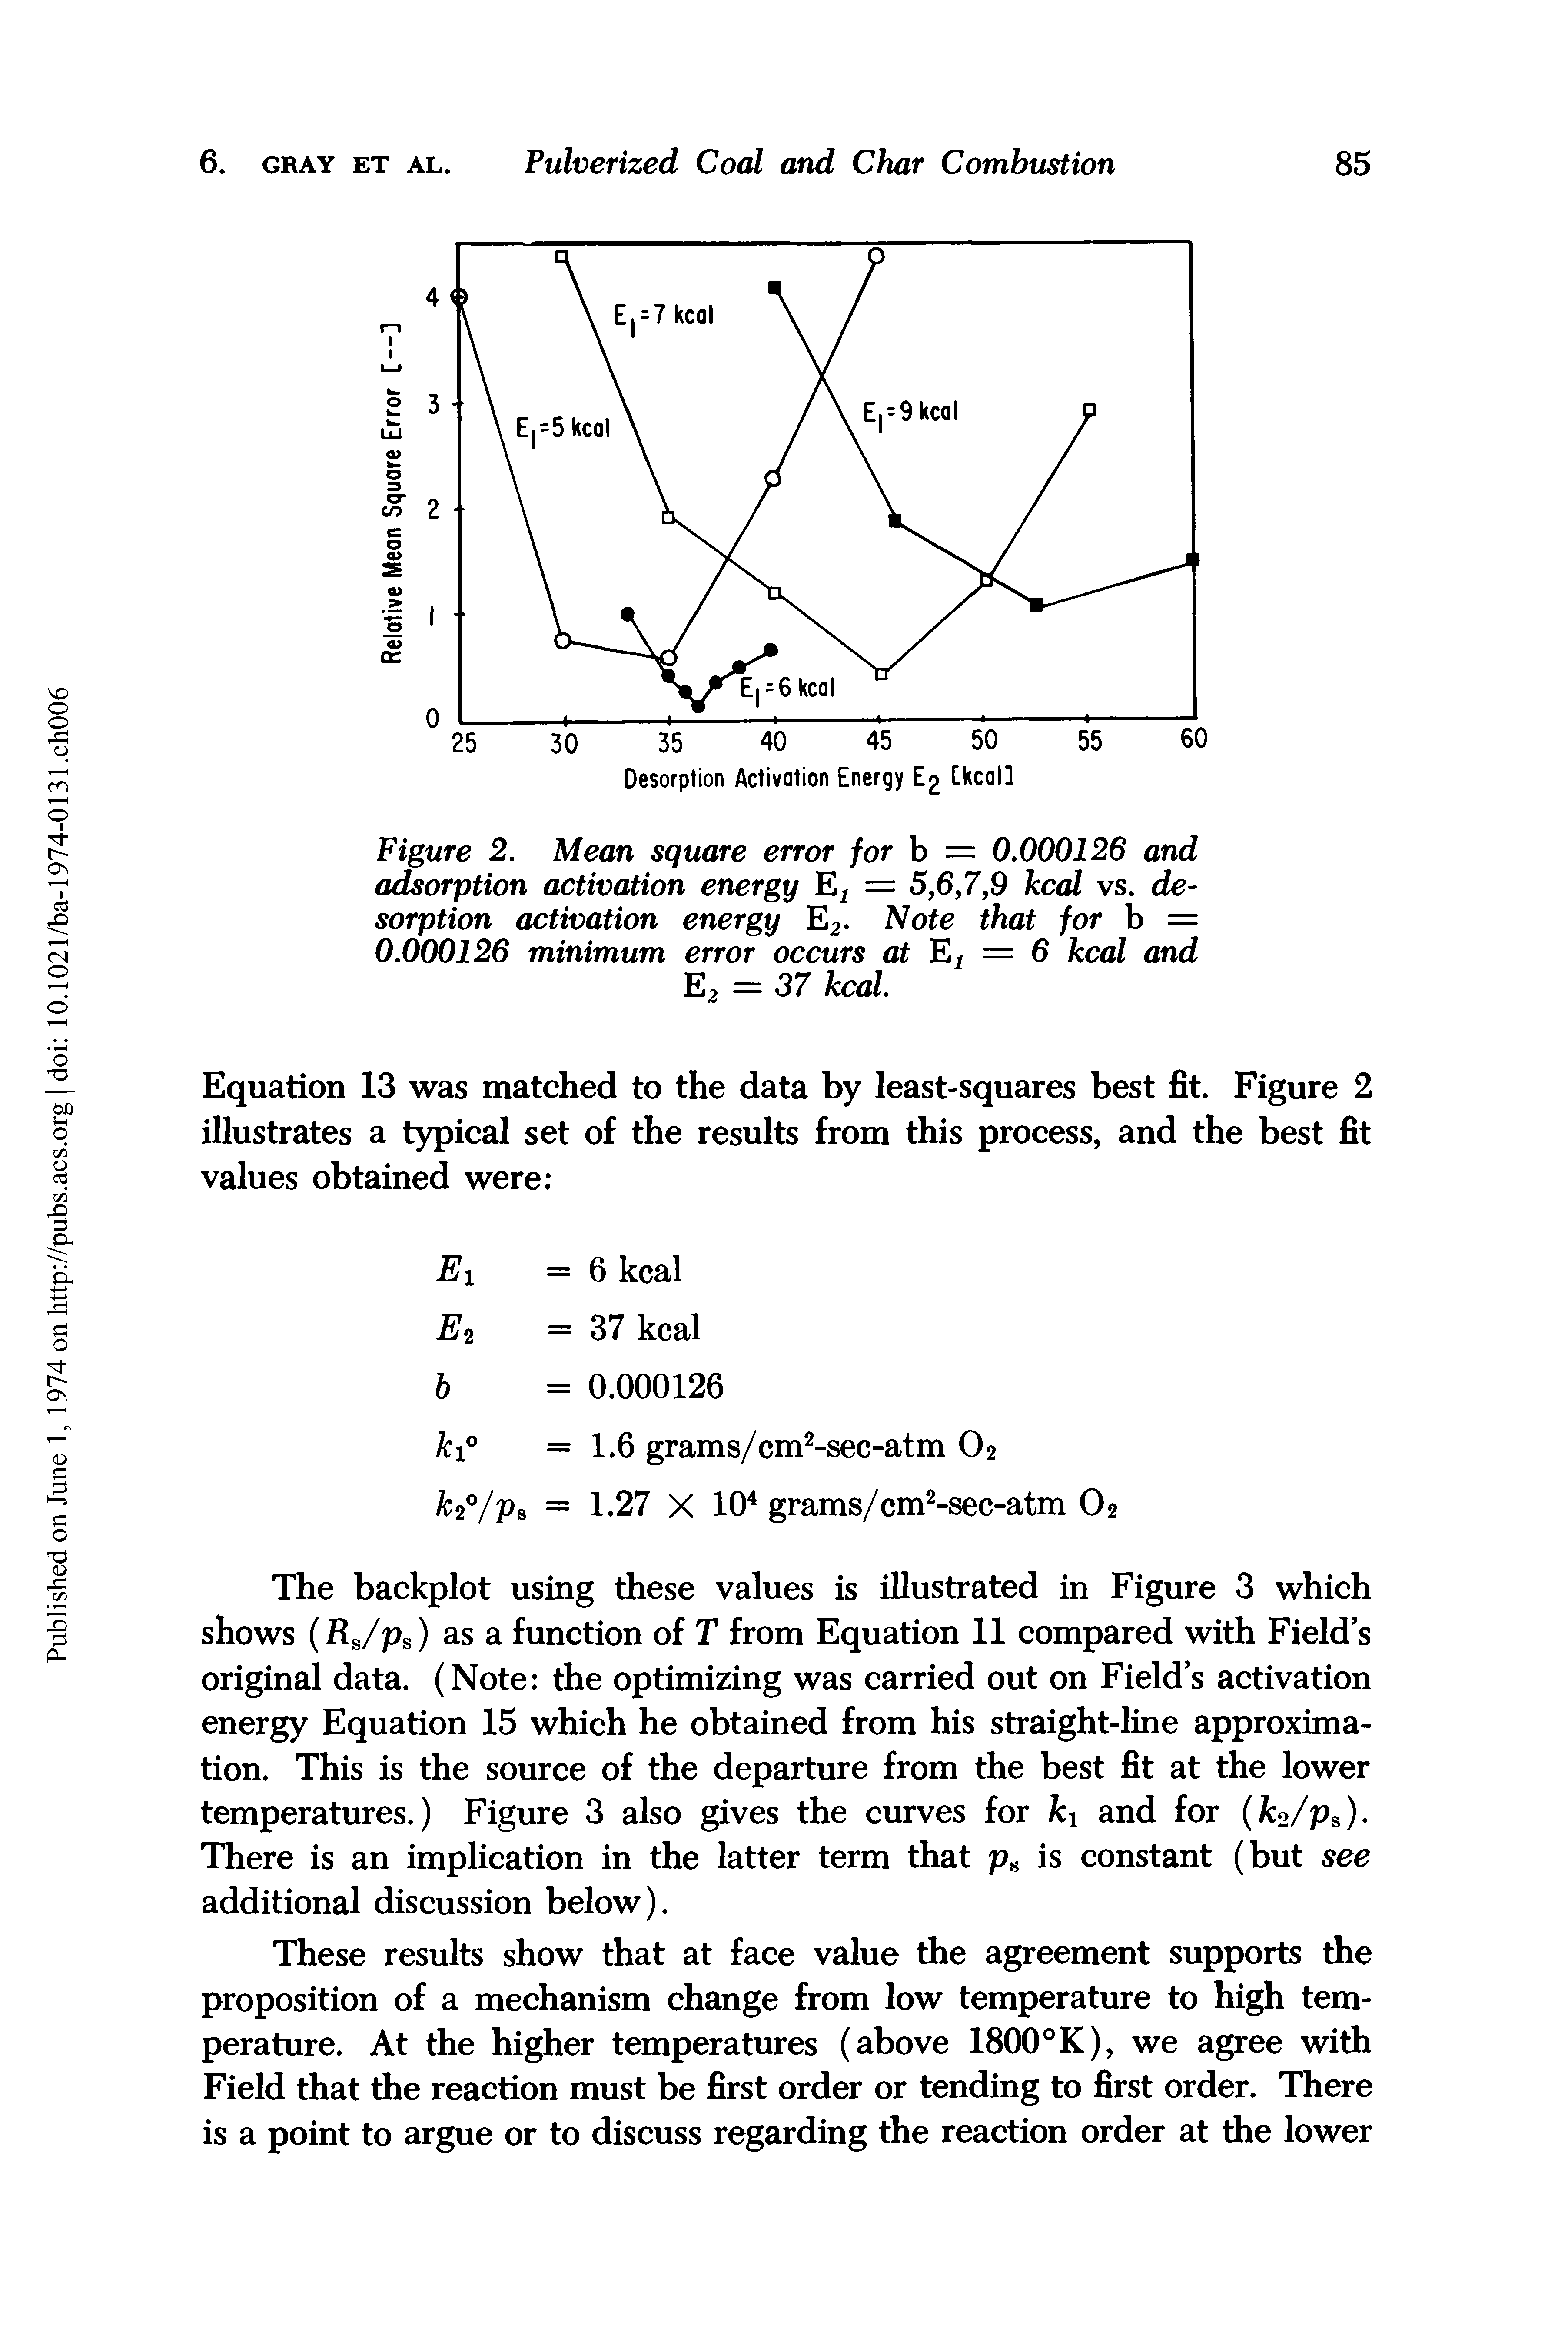 Figure 2. Mean square error for b = 0.000126 and adsorption activation energy E1 = 5,6,7,9 kcal vs. desorption activation energy E2. Note that for b =...